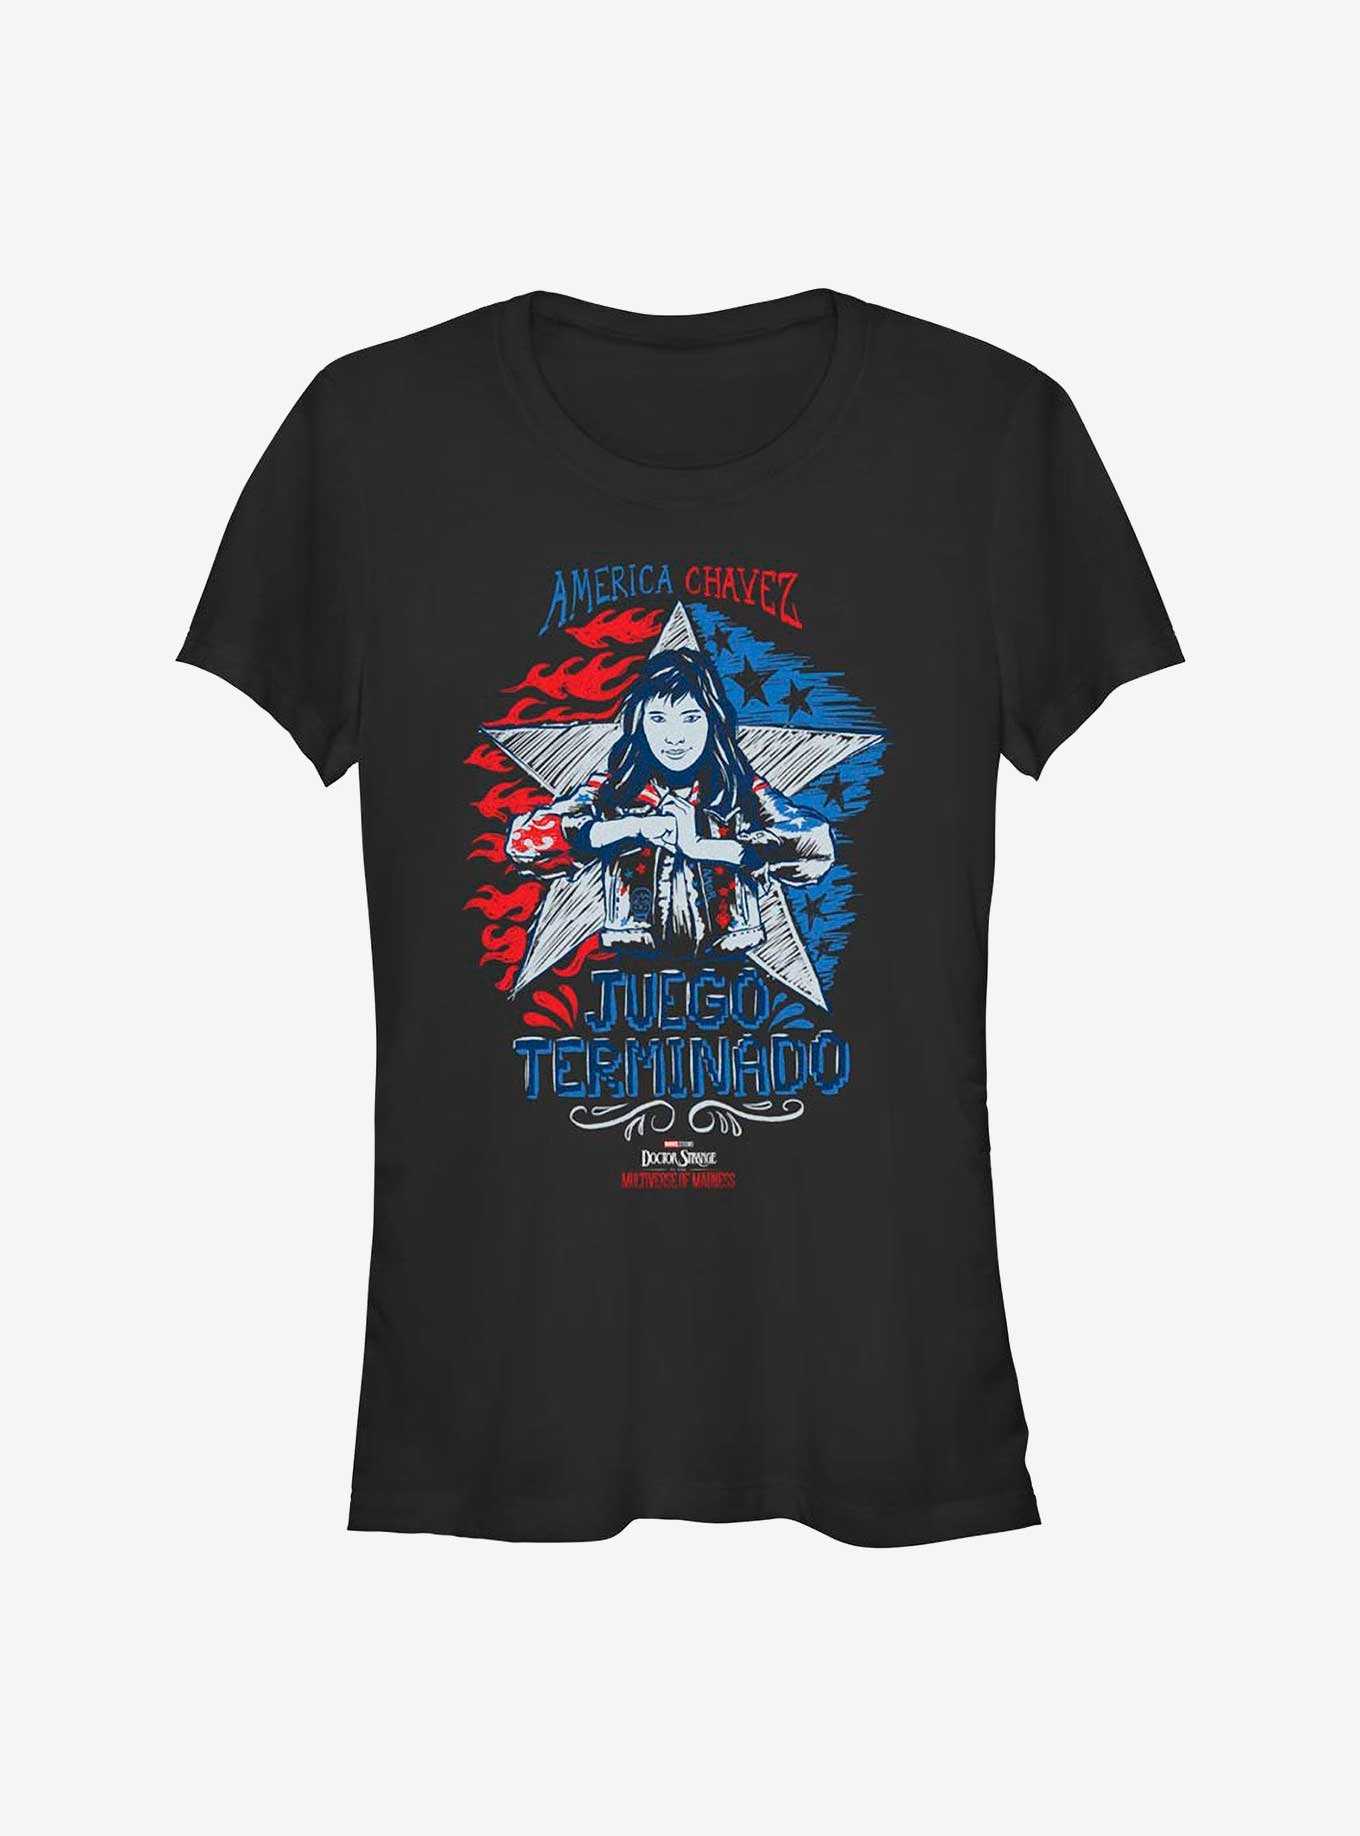 Marvel Doctor Strange In The Multiverse Of Madness Juego Terminado Girls T-Shirt, , hi-res